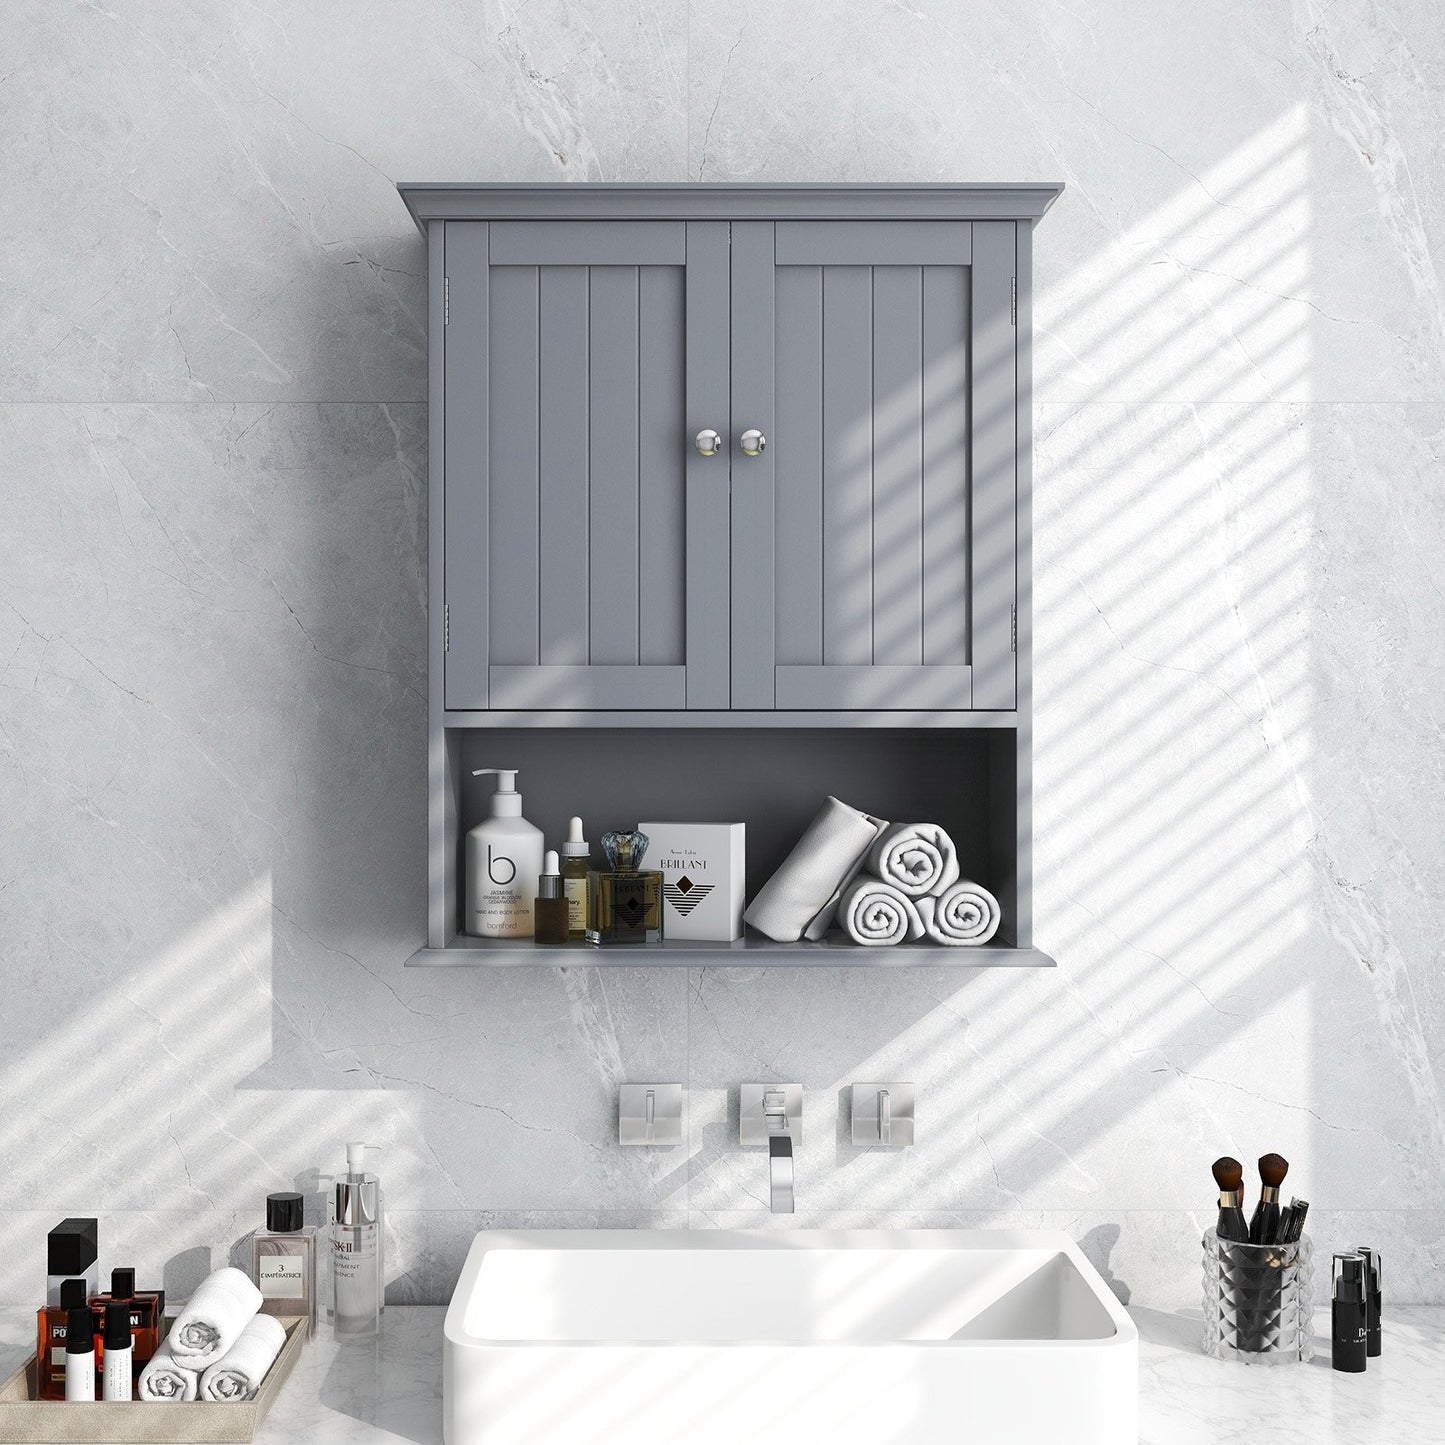 Wall Mount Bathroom Cabinet Storage Organizer with Doors and Shelves, Gray